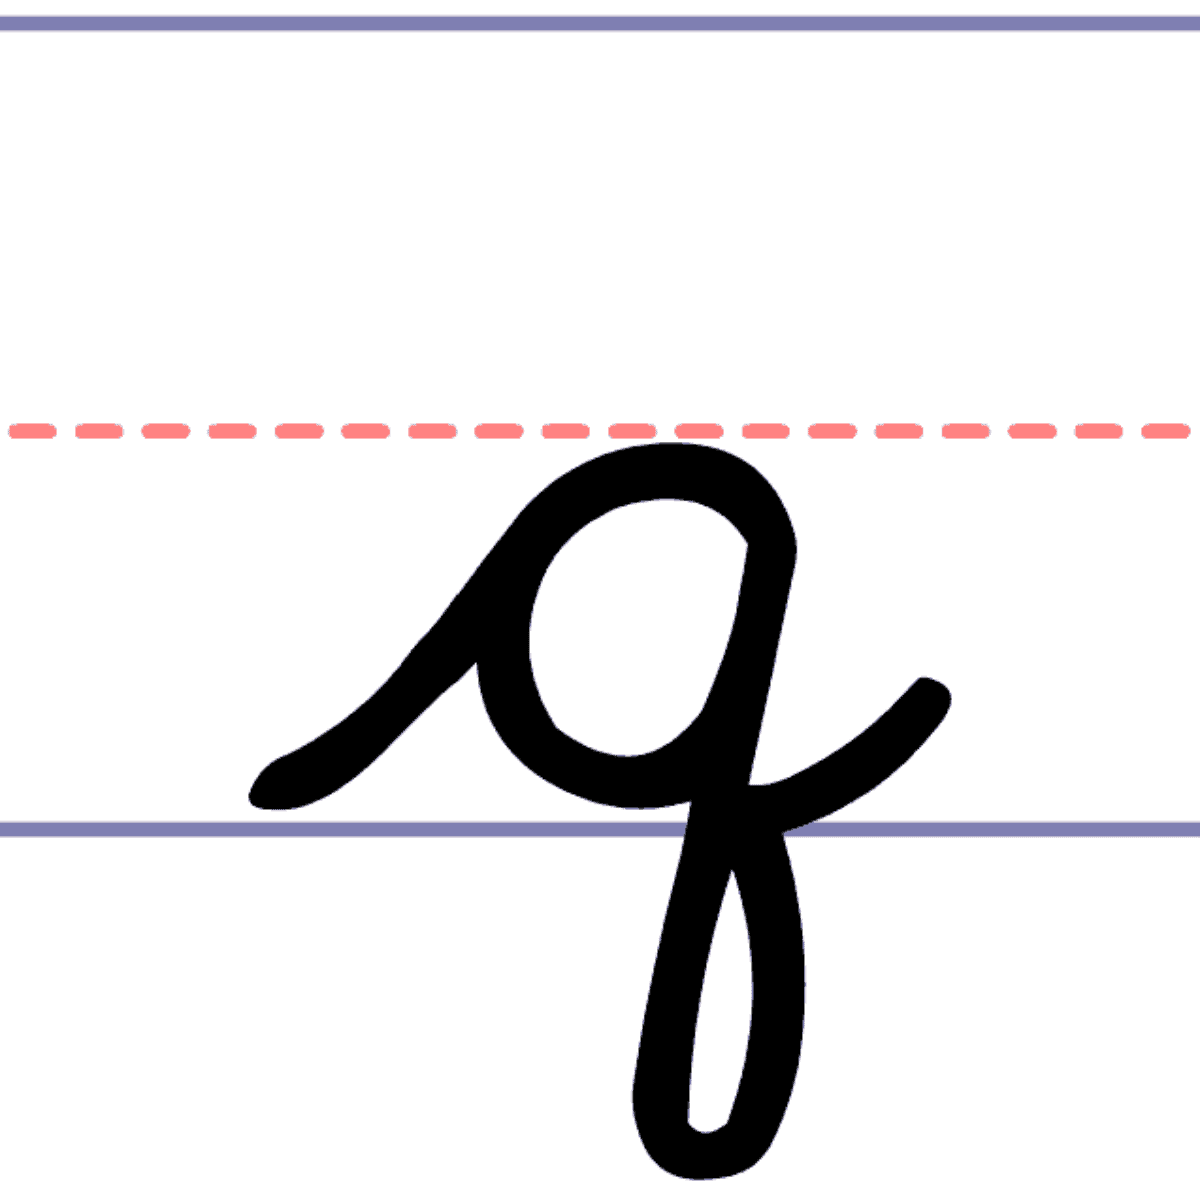 How to Write a Cursive Lowercase q